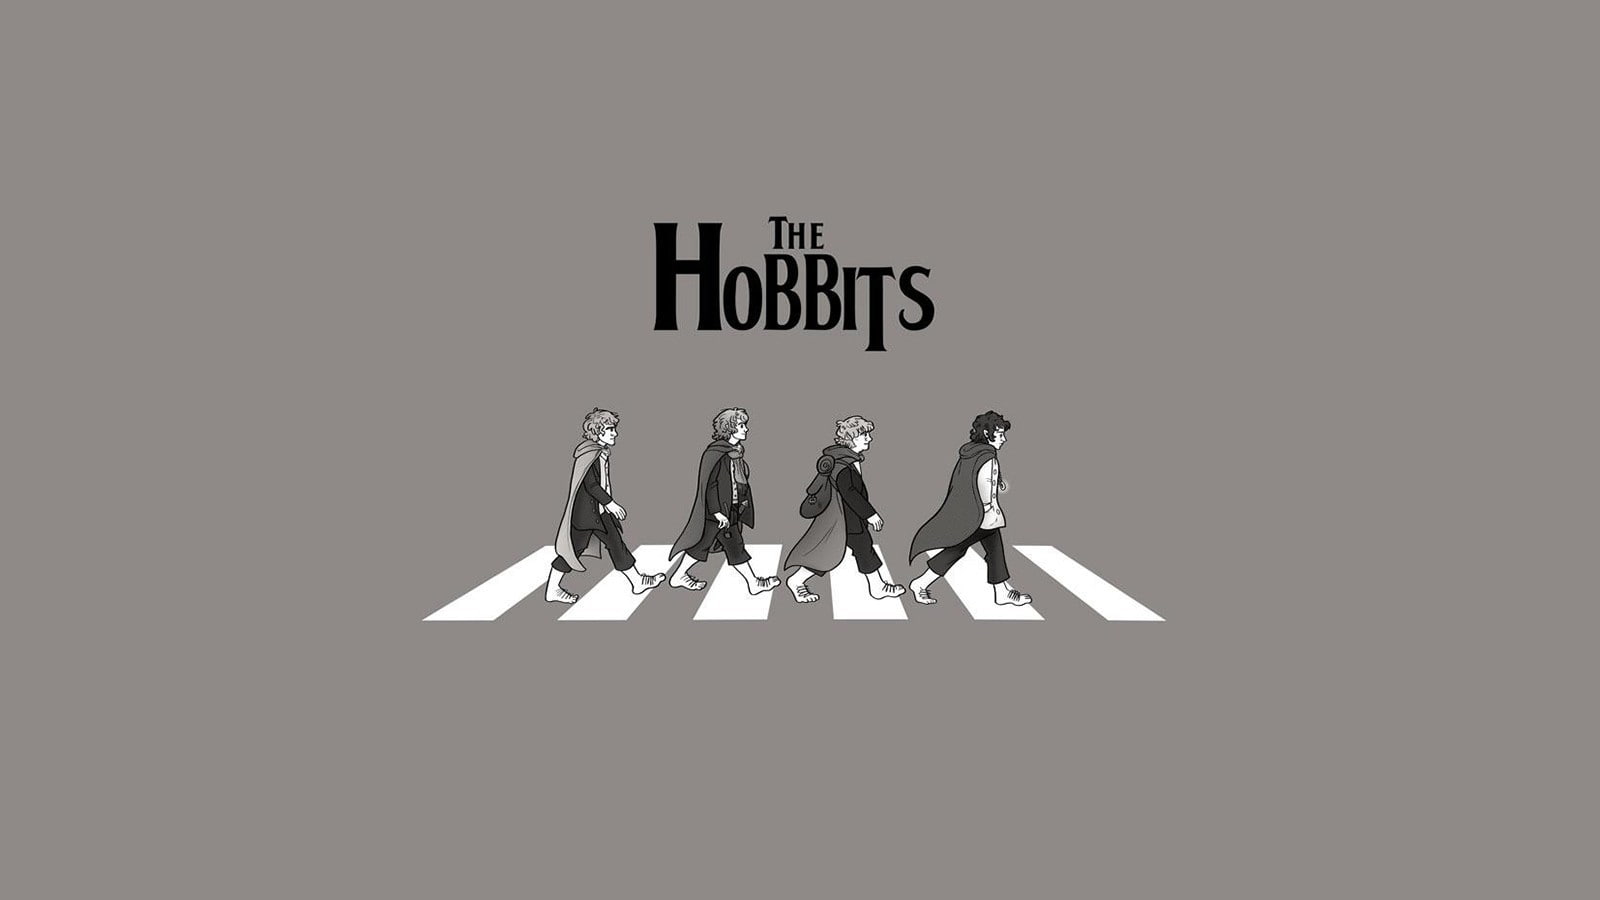 The Beatles, minimalism, monochrome, The Lord of the Rings